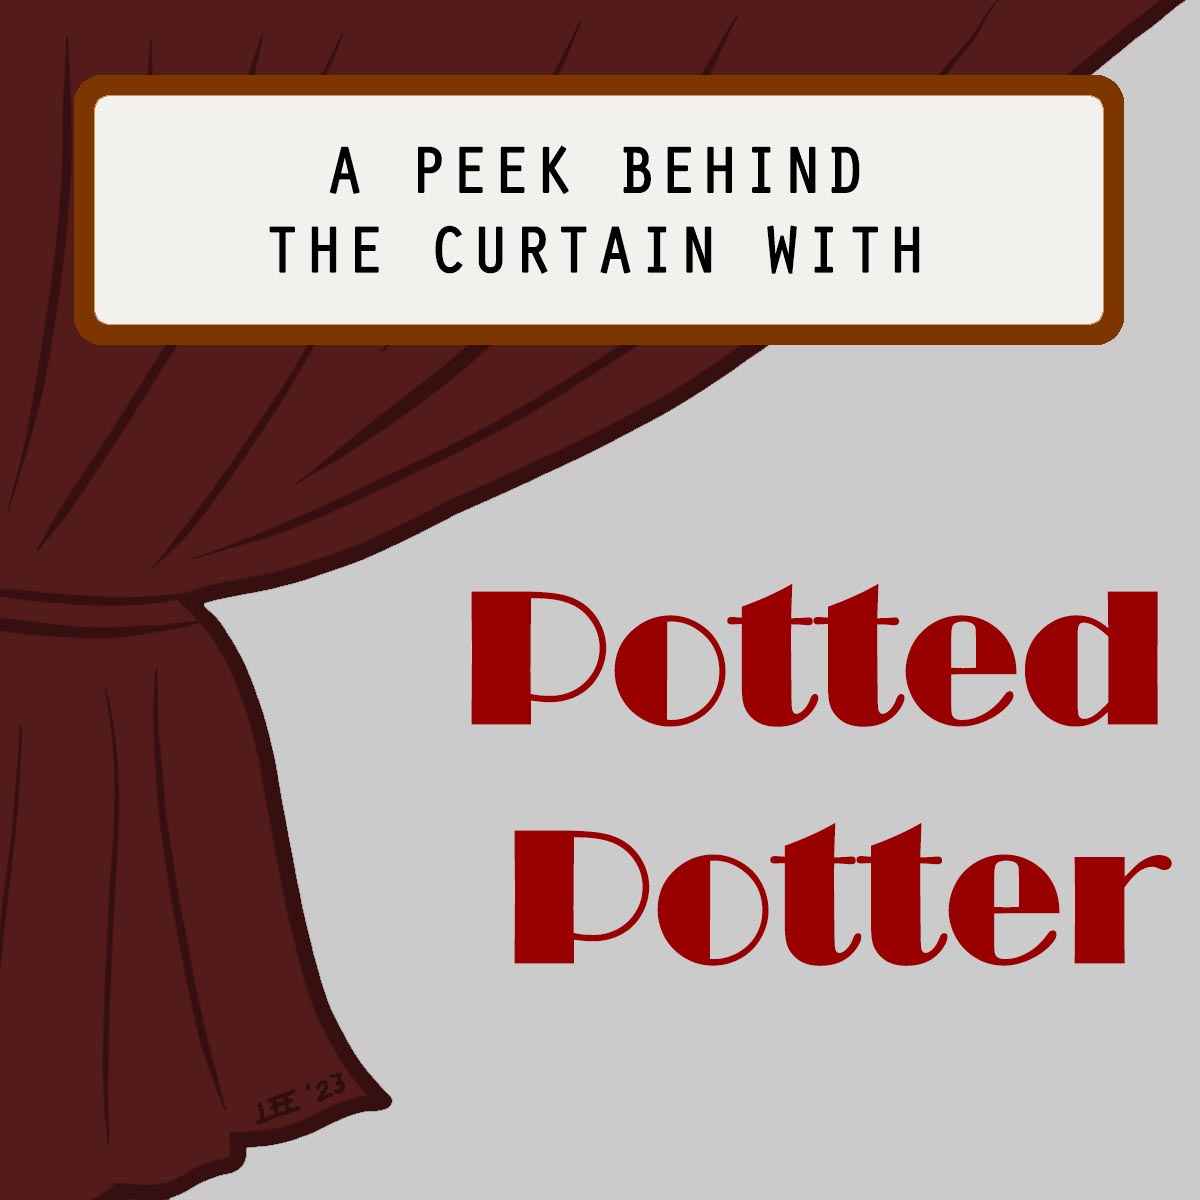 A peek behind the curtain with Potted Potter